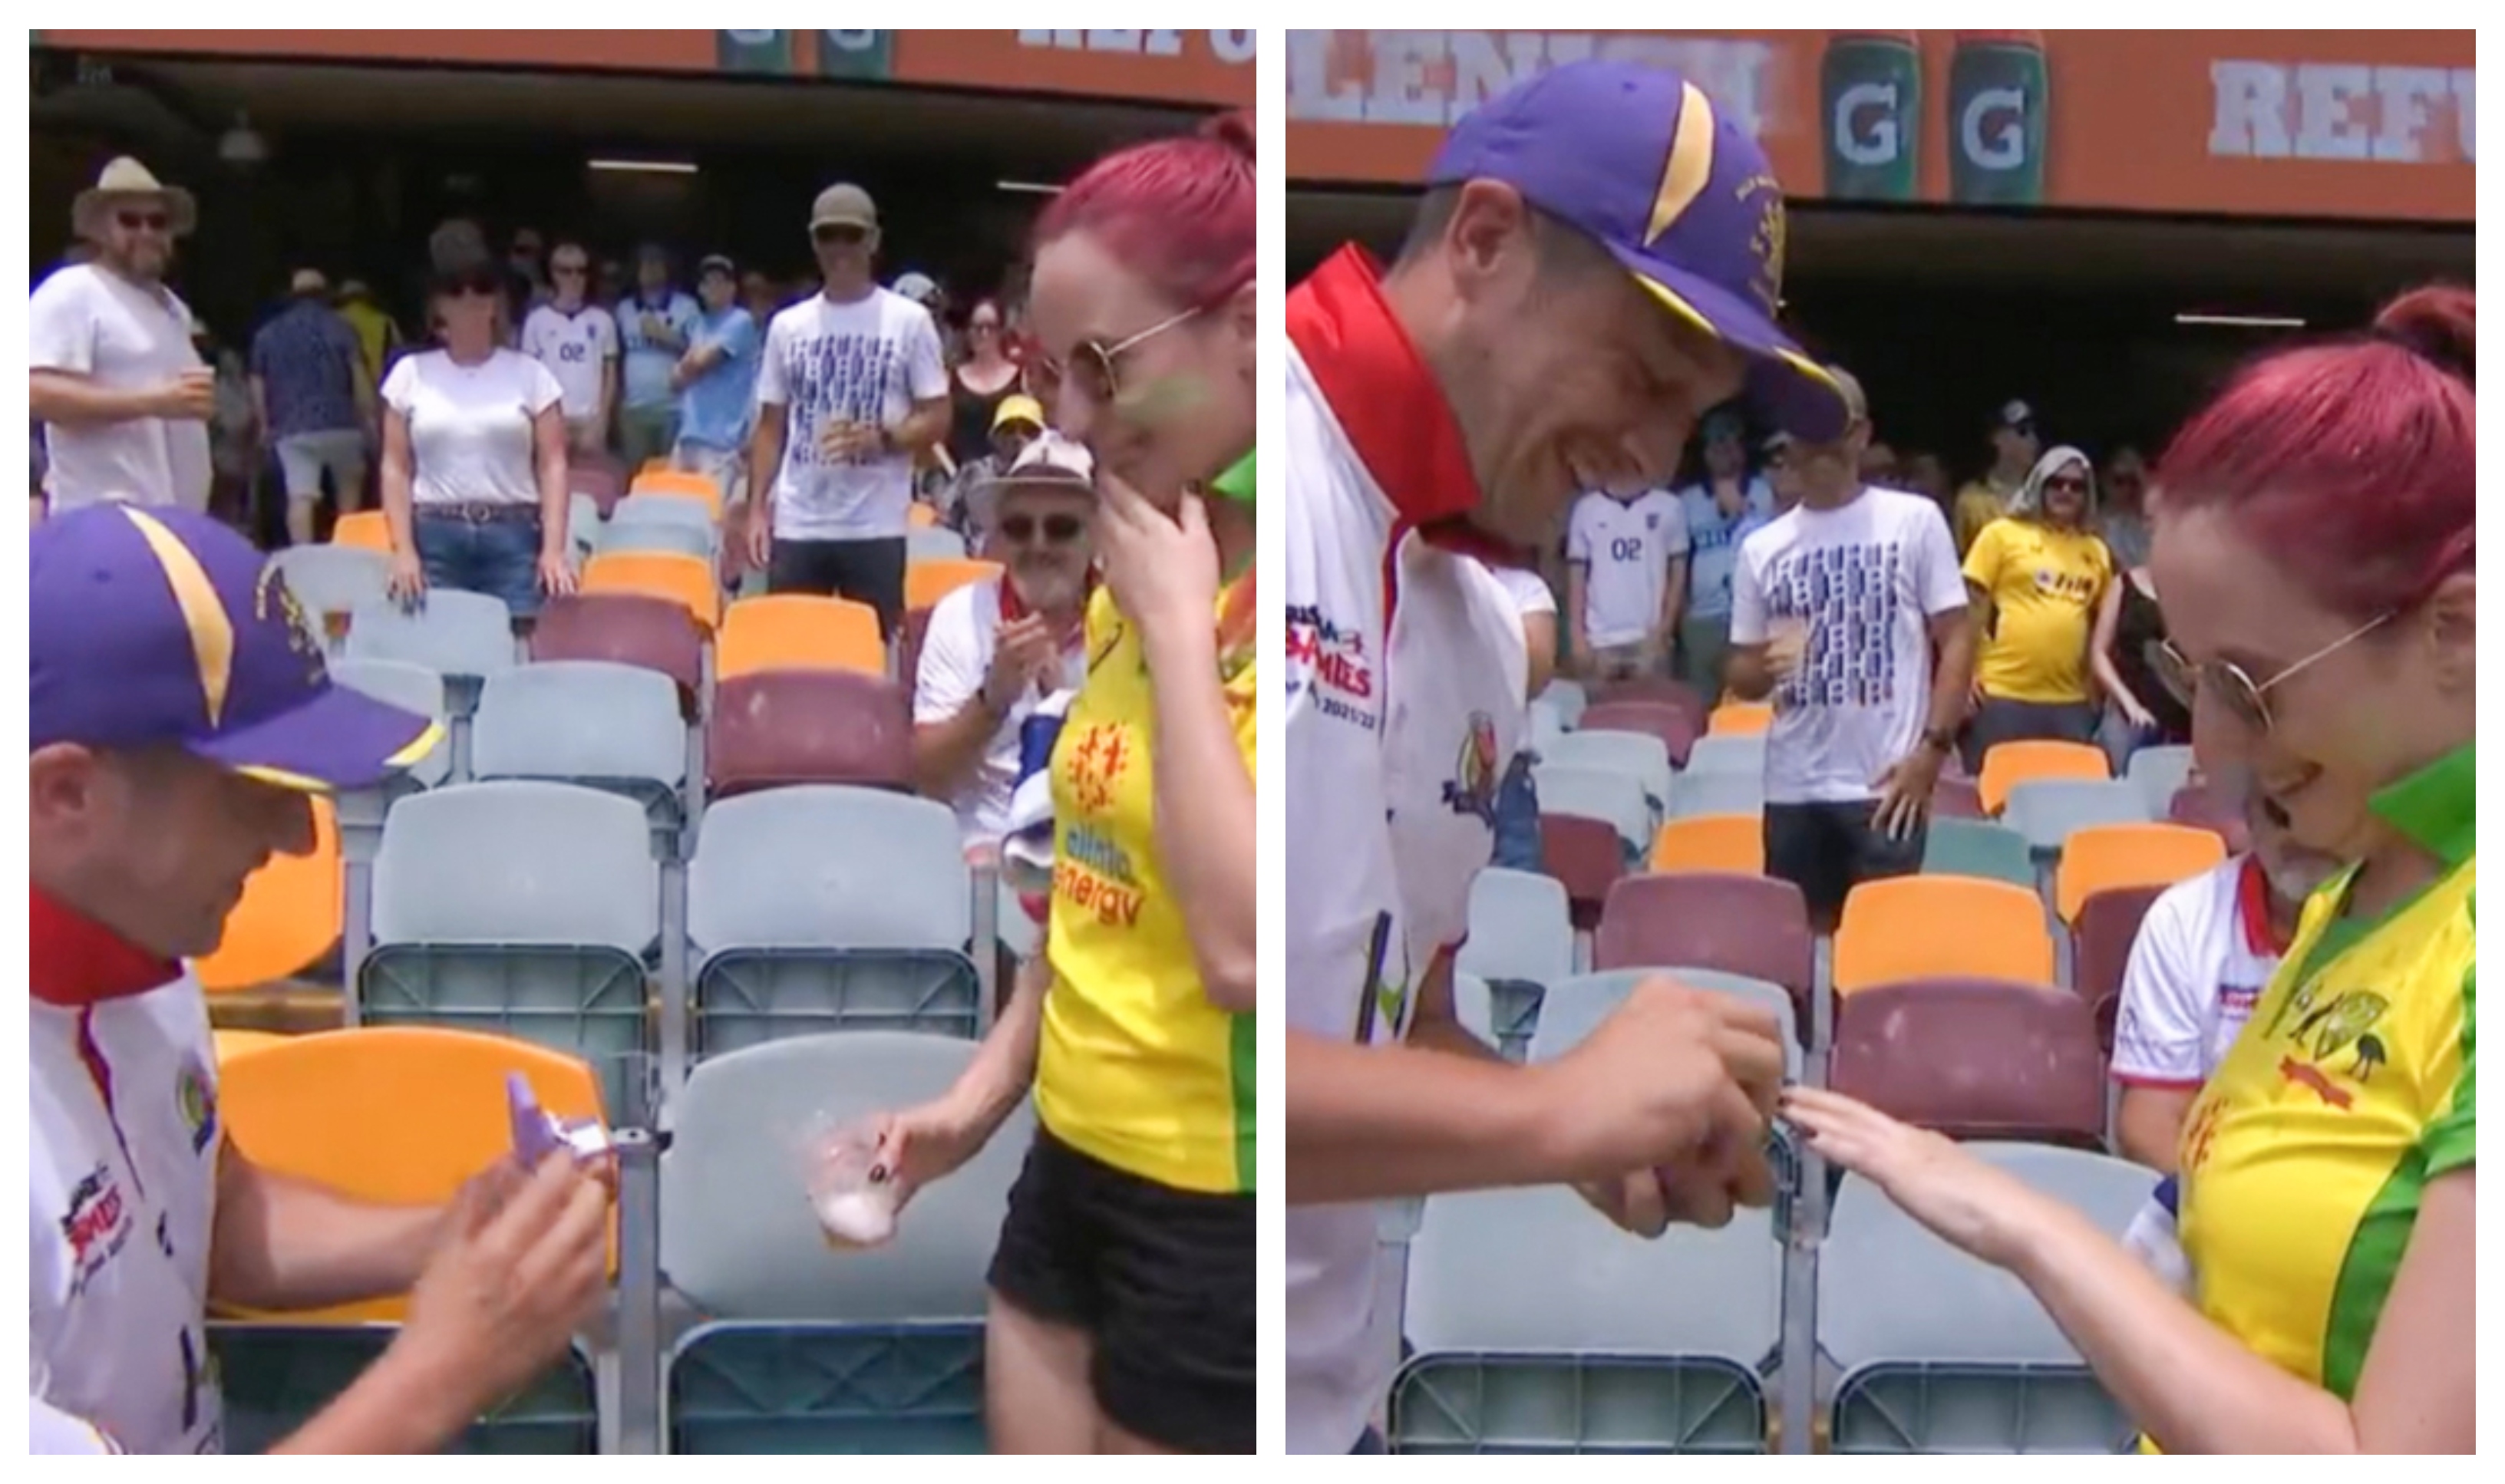 Rob proposed Nat during the first Ashes Test | Screengrab